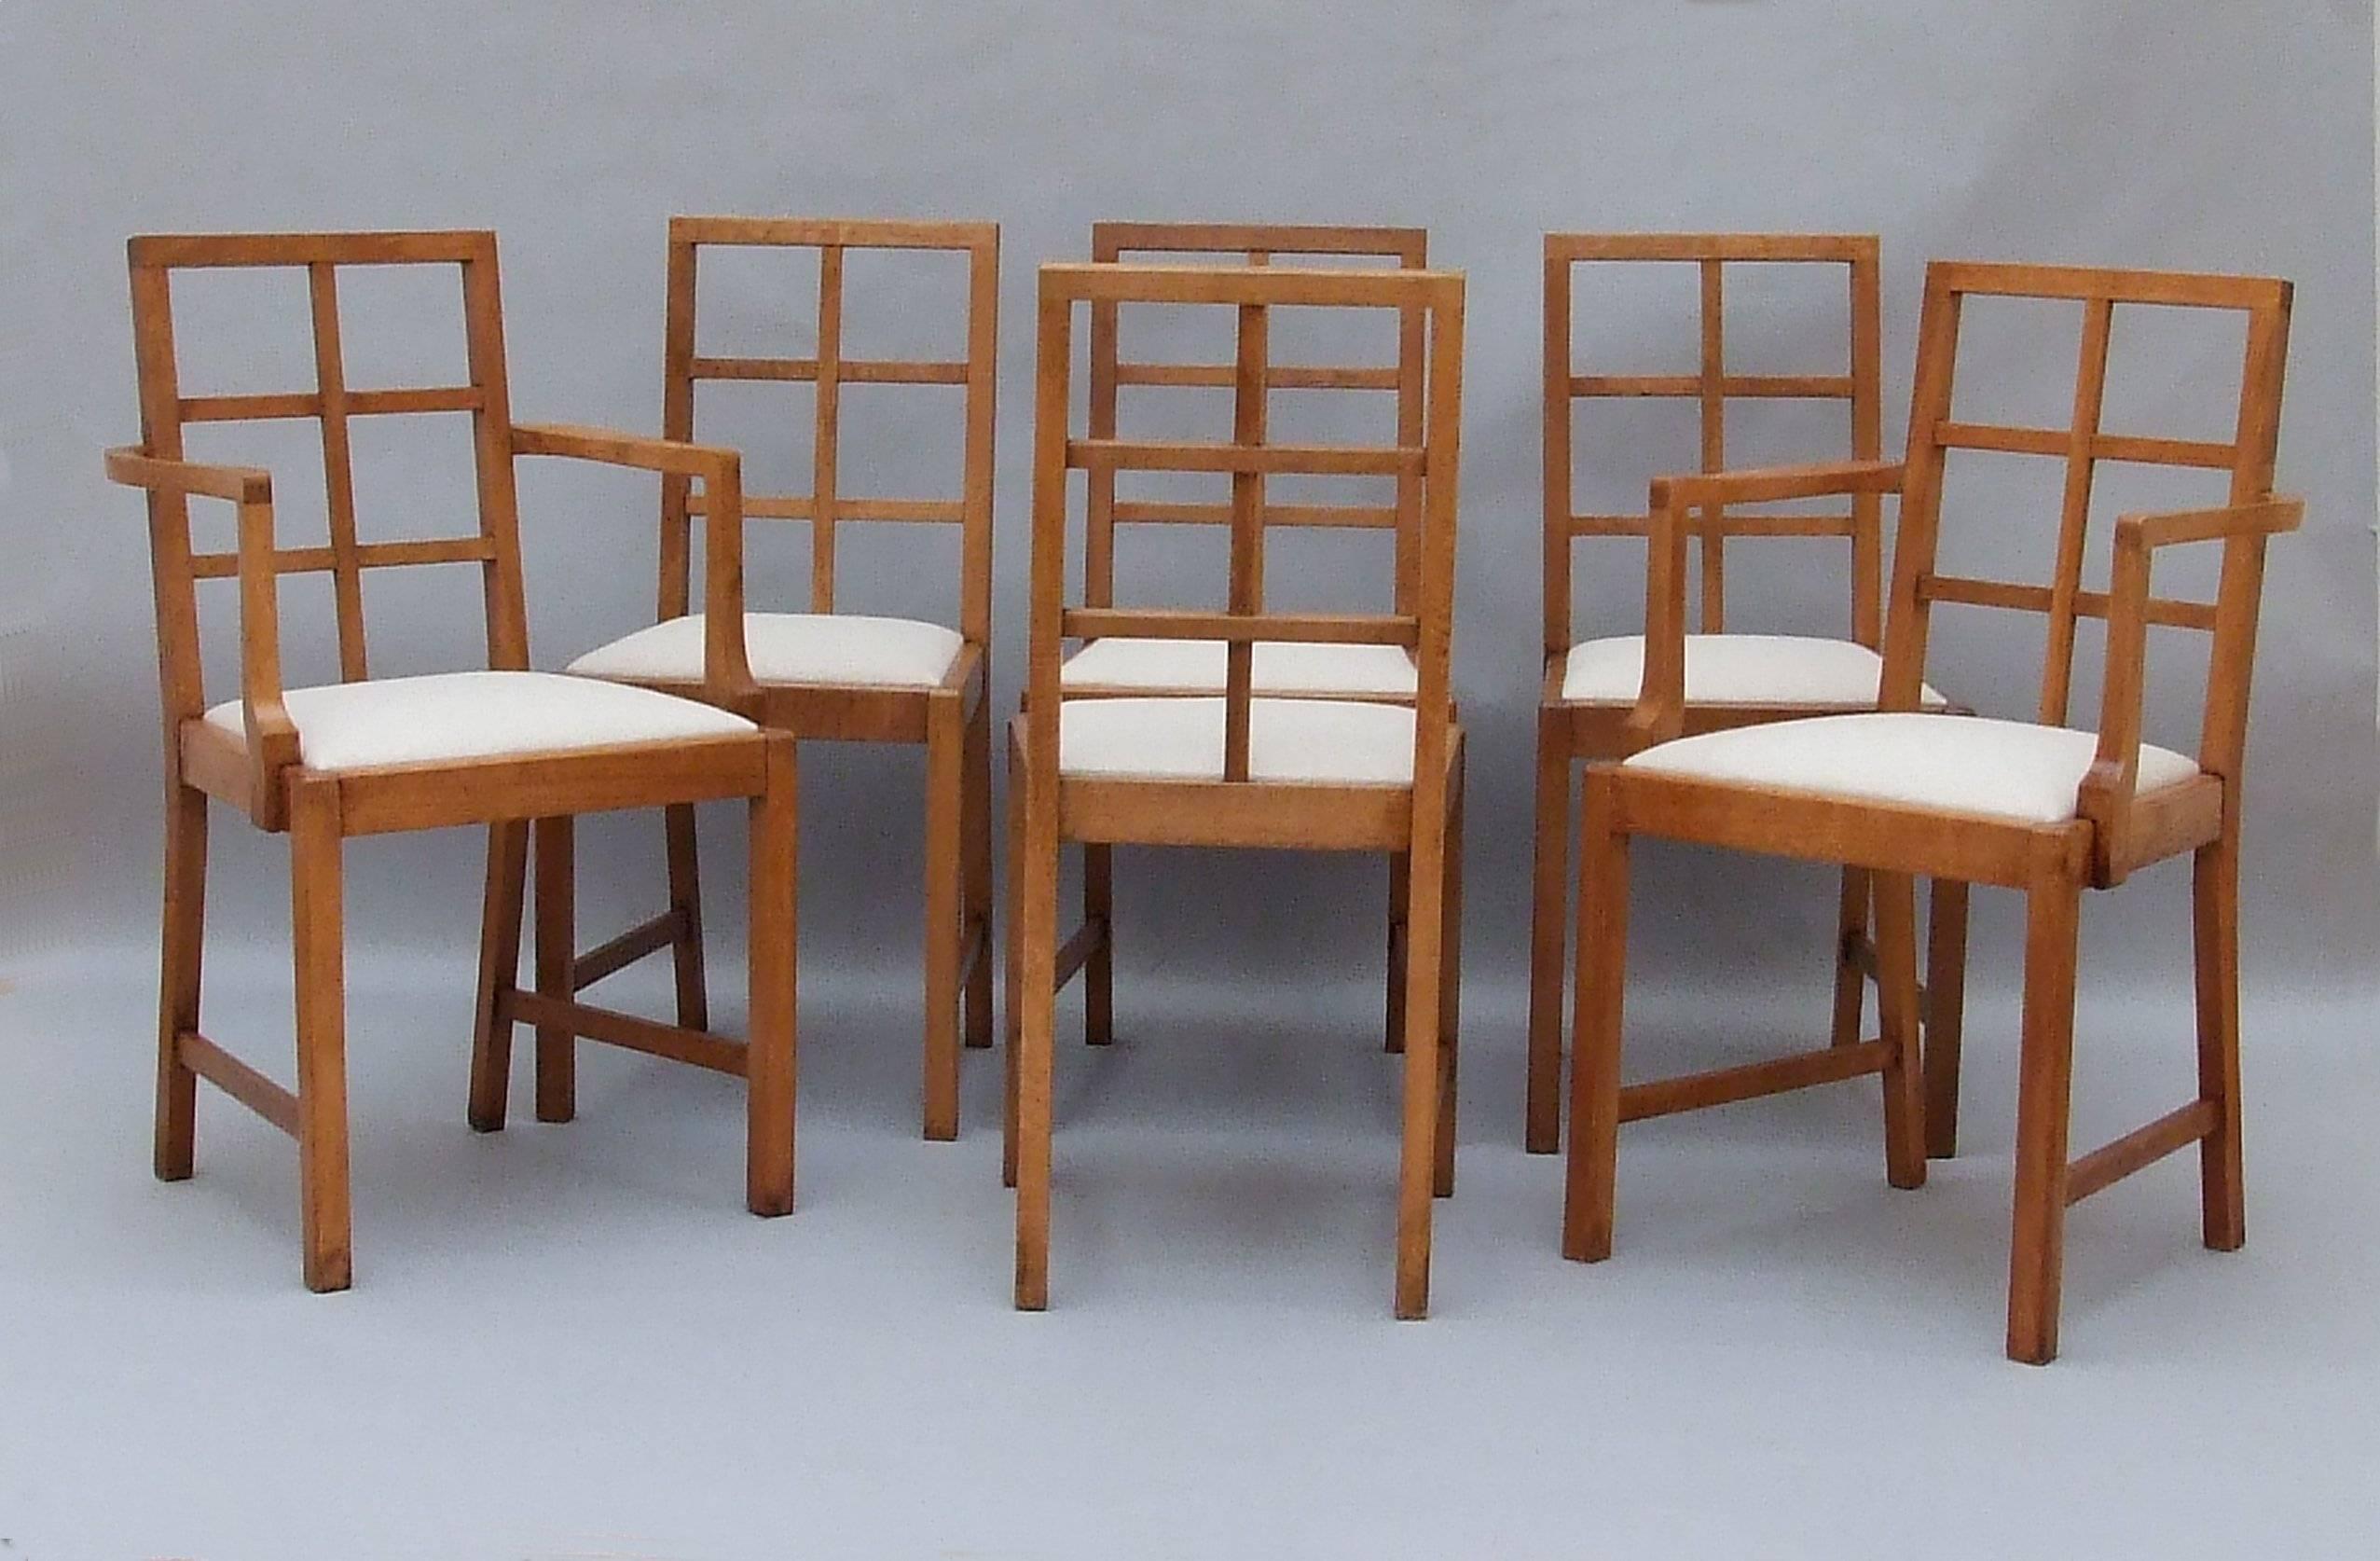 Attributed to Heals Set of Cotswold style oak lattice back dining chairs, two arms, four sides, with chamfered frame and legs and with drop in seats re-upholstered in linen, circa 1925, 90cm (35.5in) high, seat height 48cm (19in).